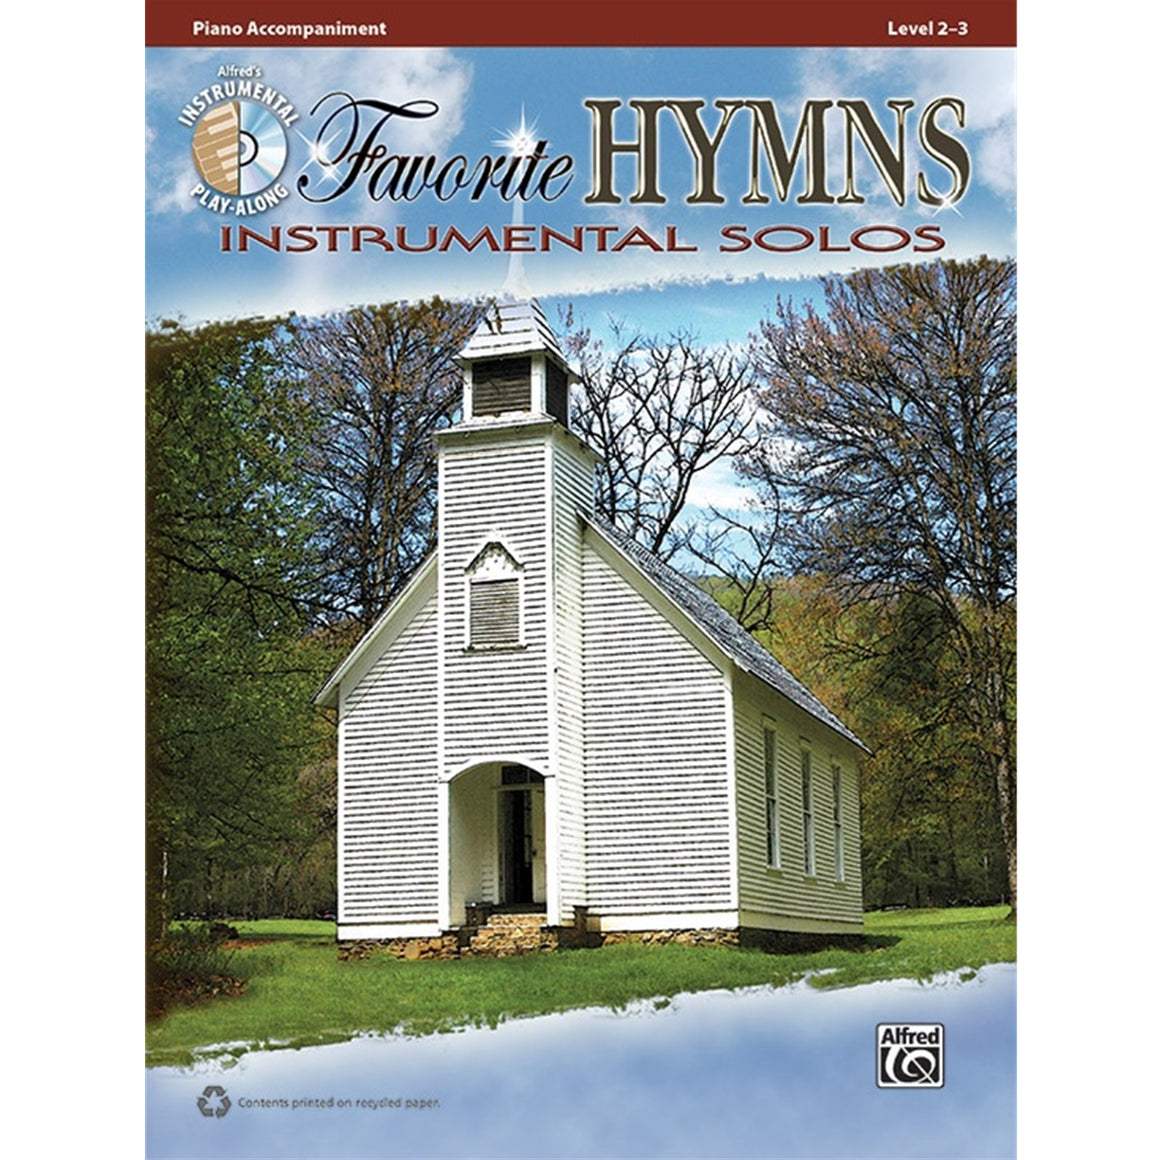 ALFRED 36130 Favorite Hymns Instrumental Solos [Piano Acc.]